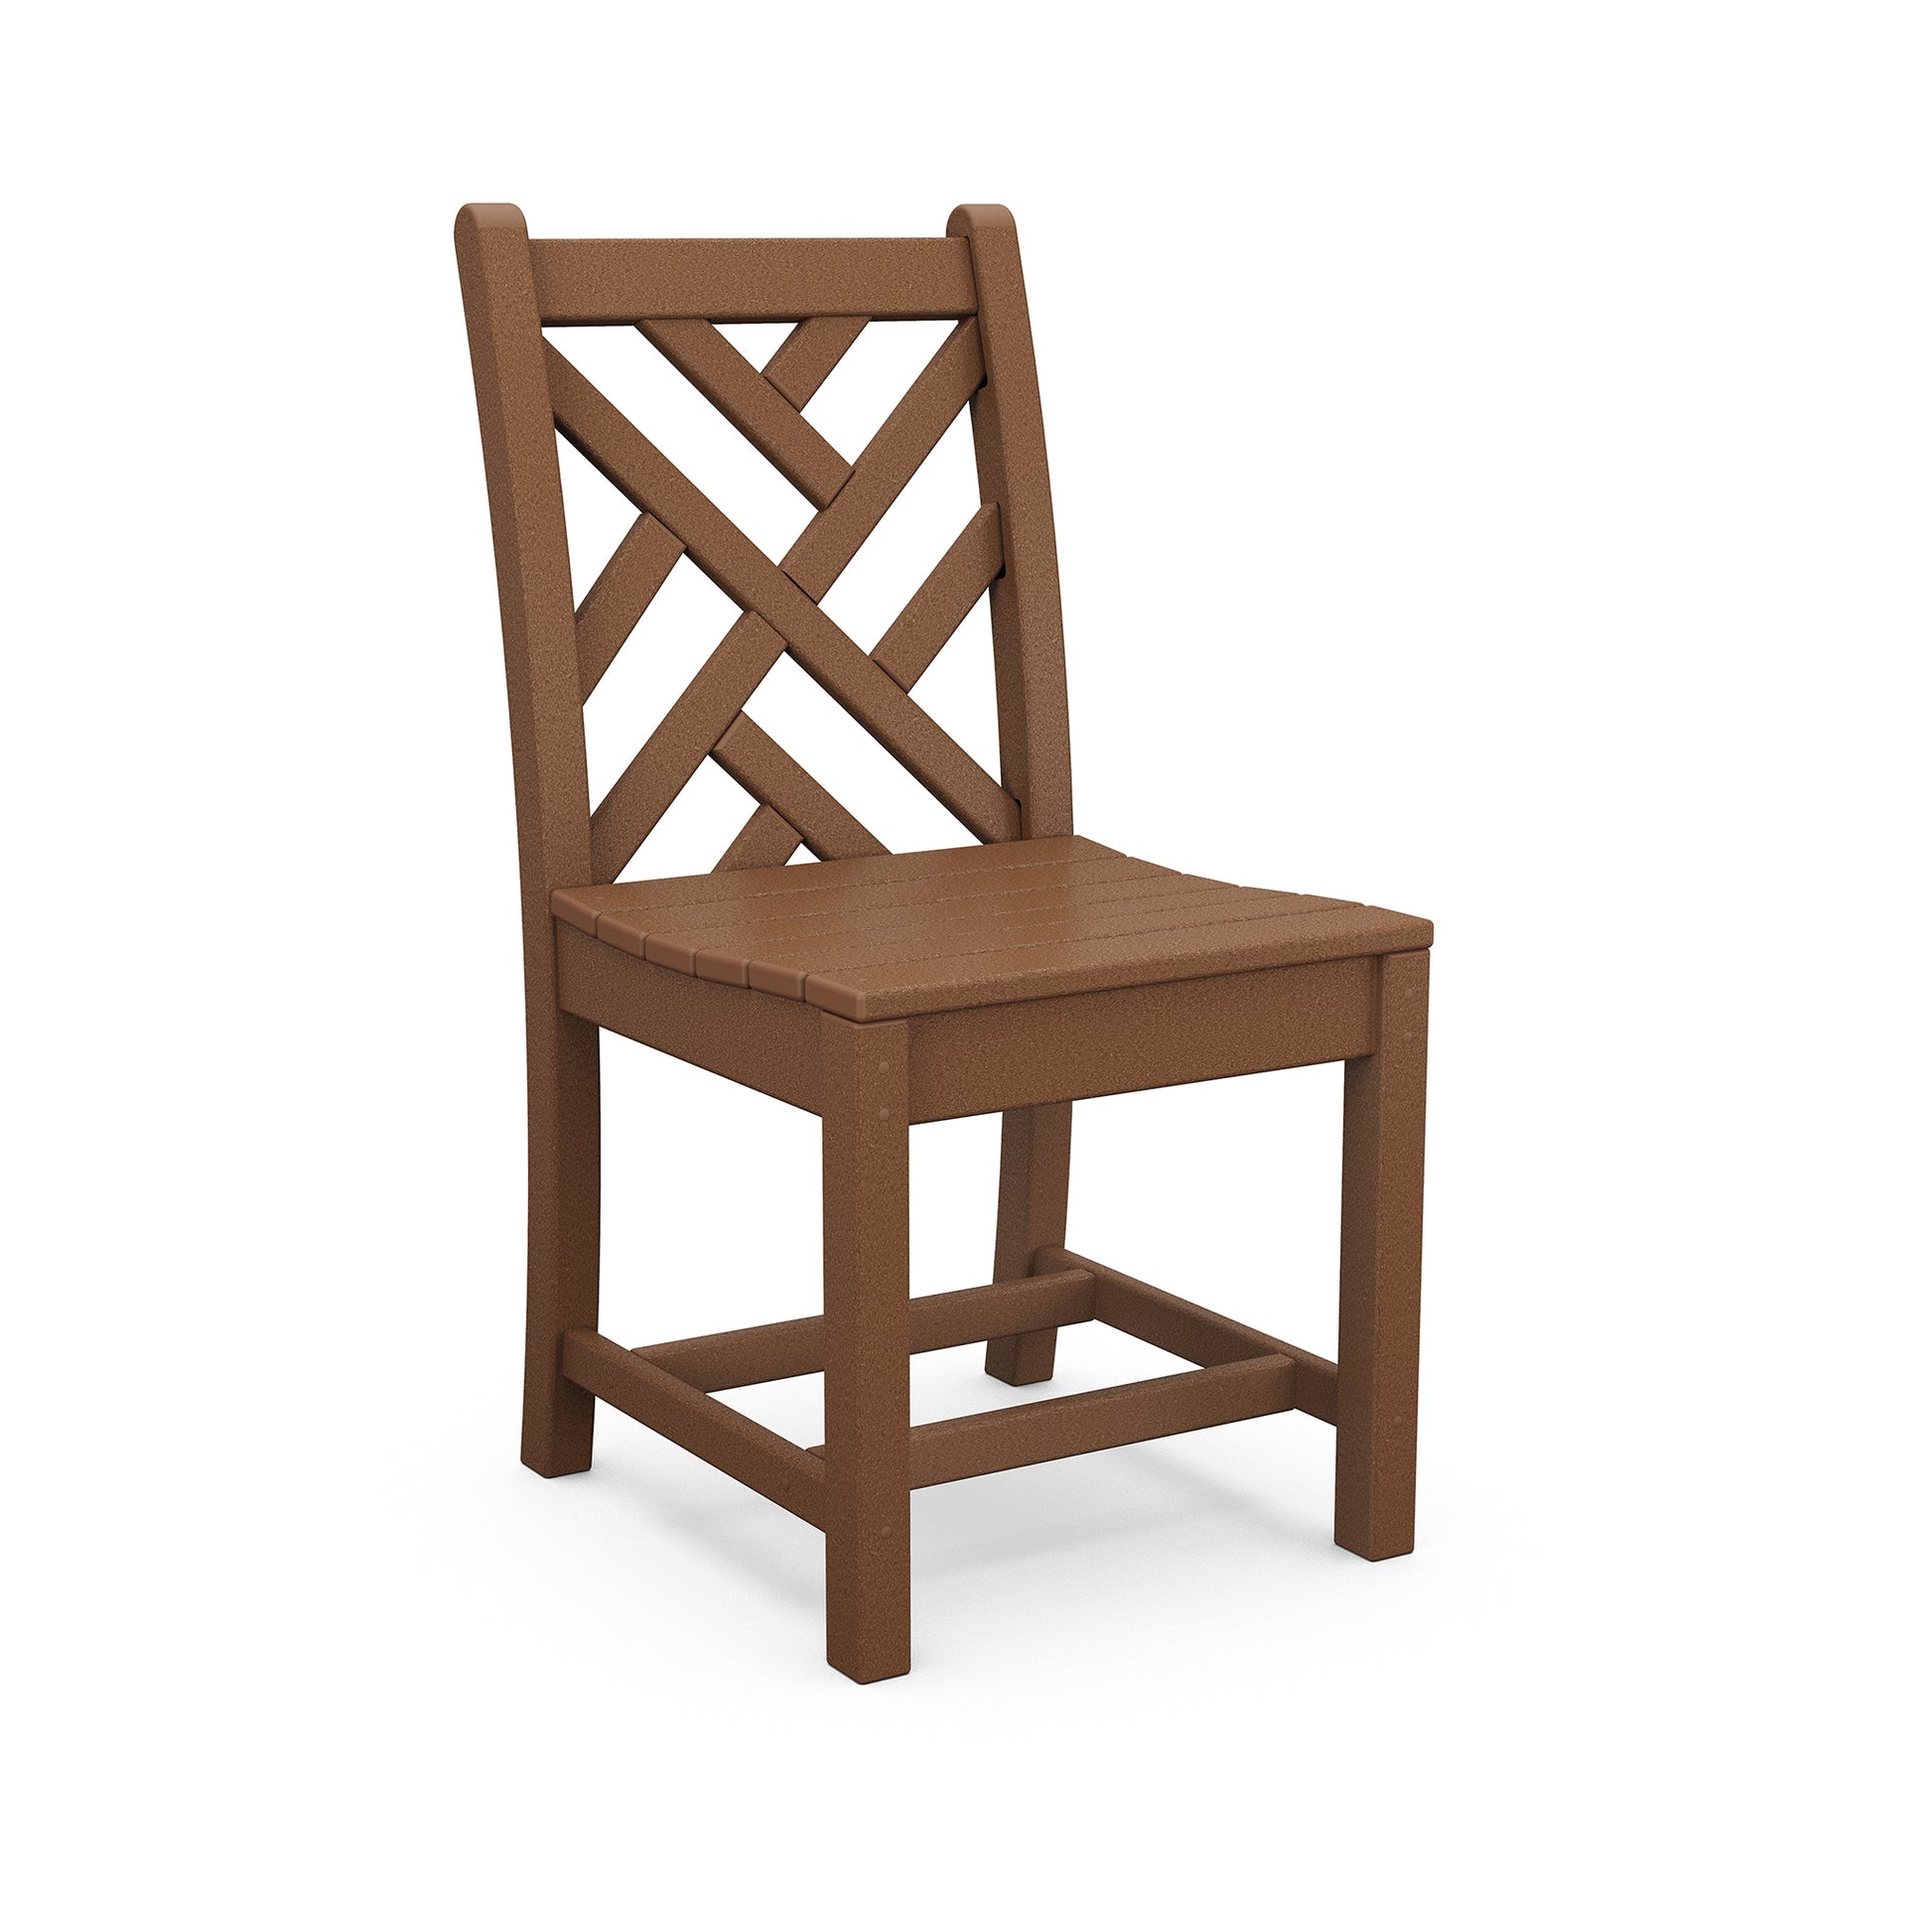 A brown POLYWOOD® Chippendale Outdoor Dining Side Chair with a criss-cross backrest design, made of recycled plastic. It is shown in an isolated view with a white background.